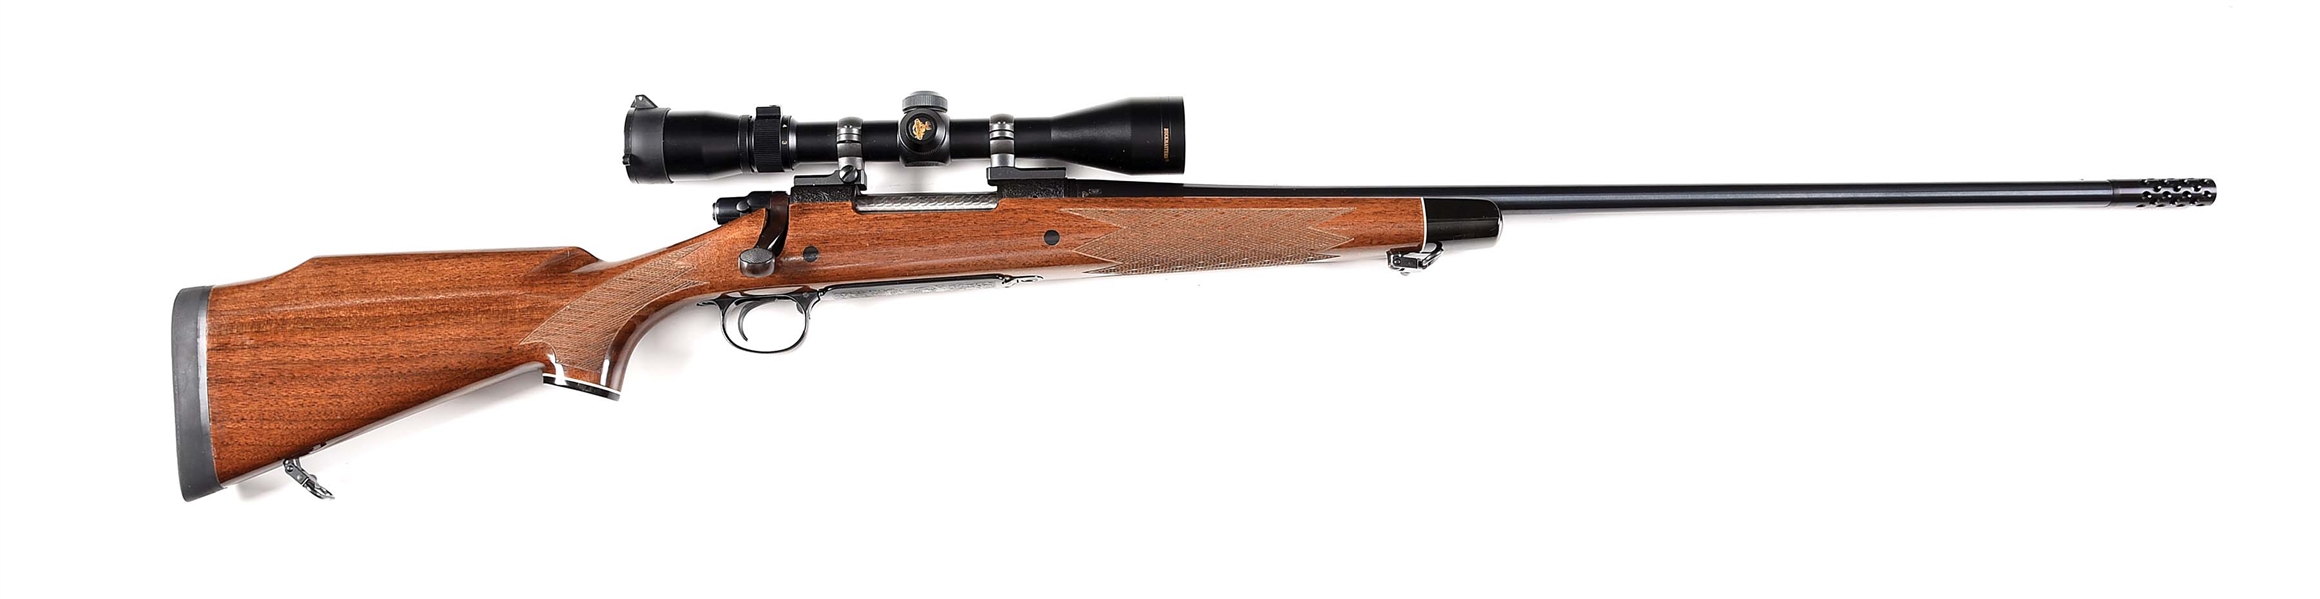 (M) REMINGTON MODEL 700 DELUXE ENHANCED RECIEVER BOLT ACTION RIFLE WITH SCOPE.